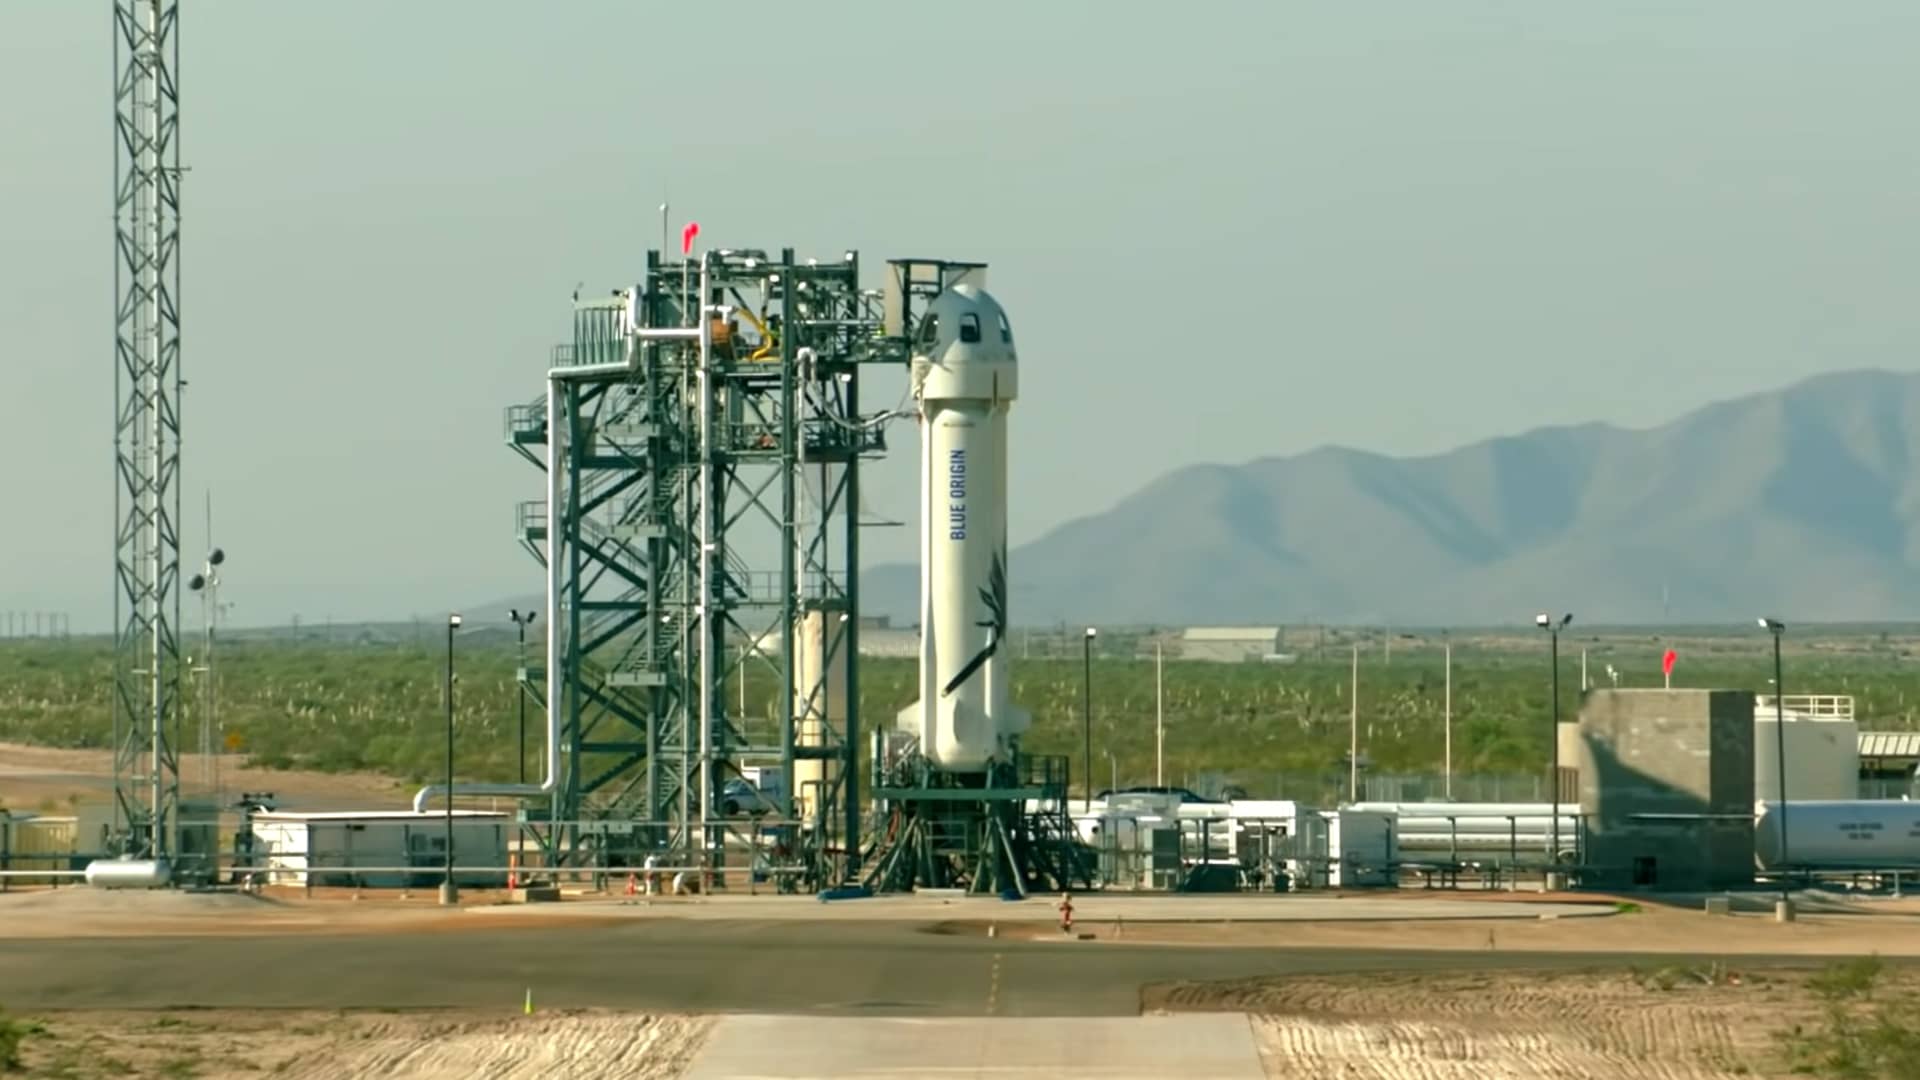 A New Shepard rocket stands ready to launch at the company's private facility before a previous uncrewed test flight.